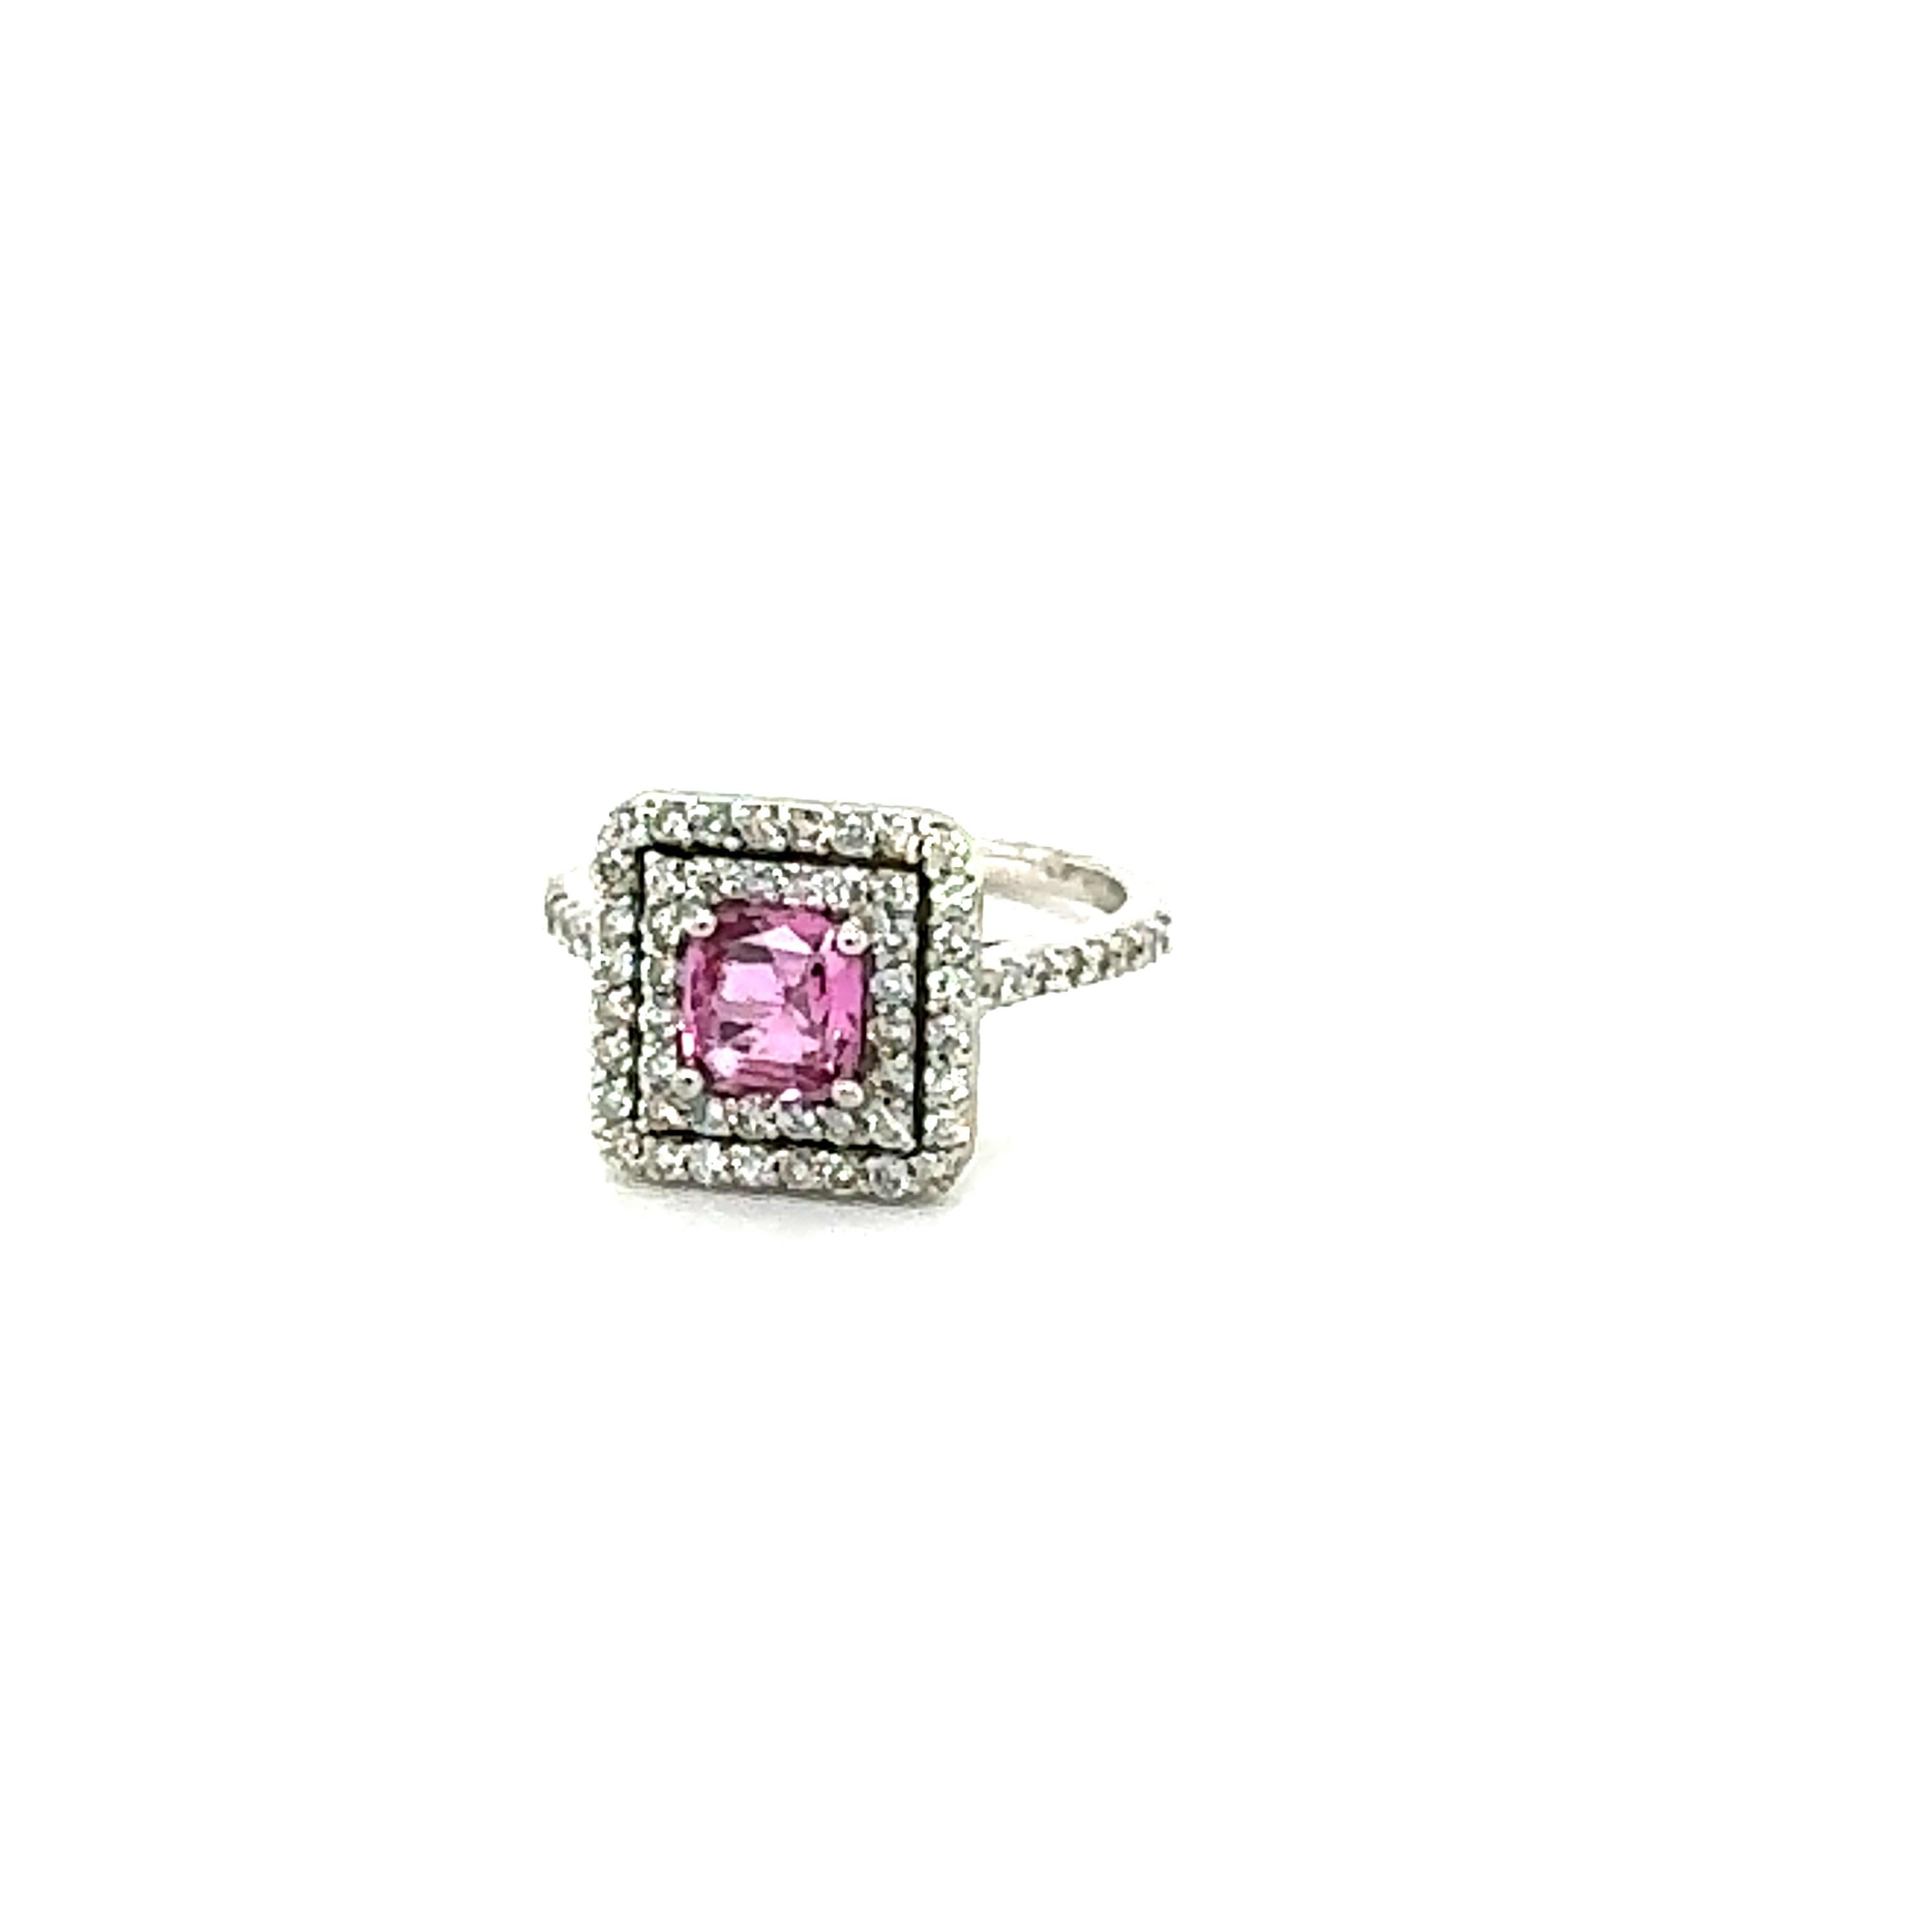 Cushion Cut GIA Certified 1.77 Carat Pink Sapphire Diamond White Gold Engagement Ring For Sale